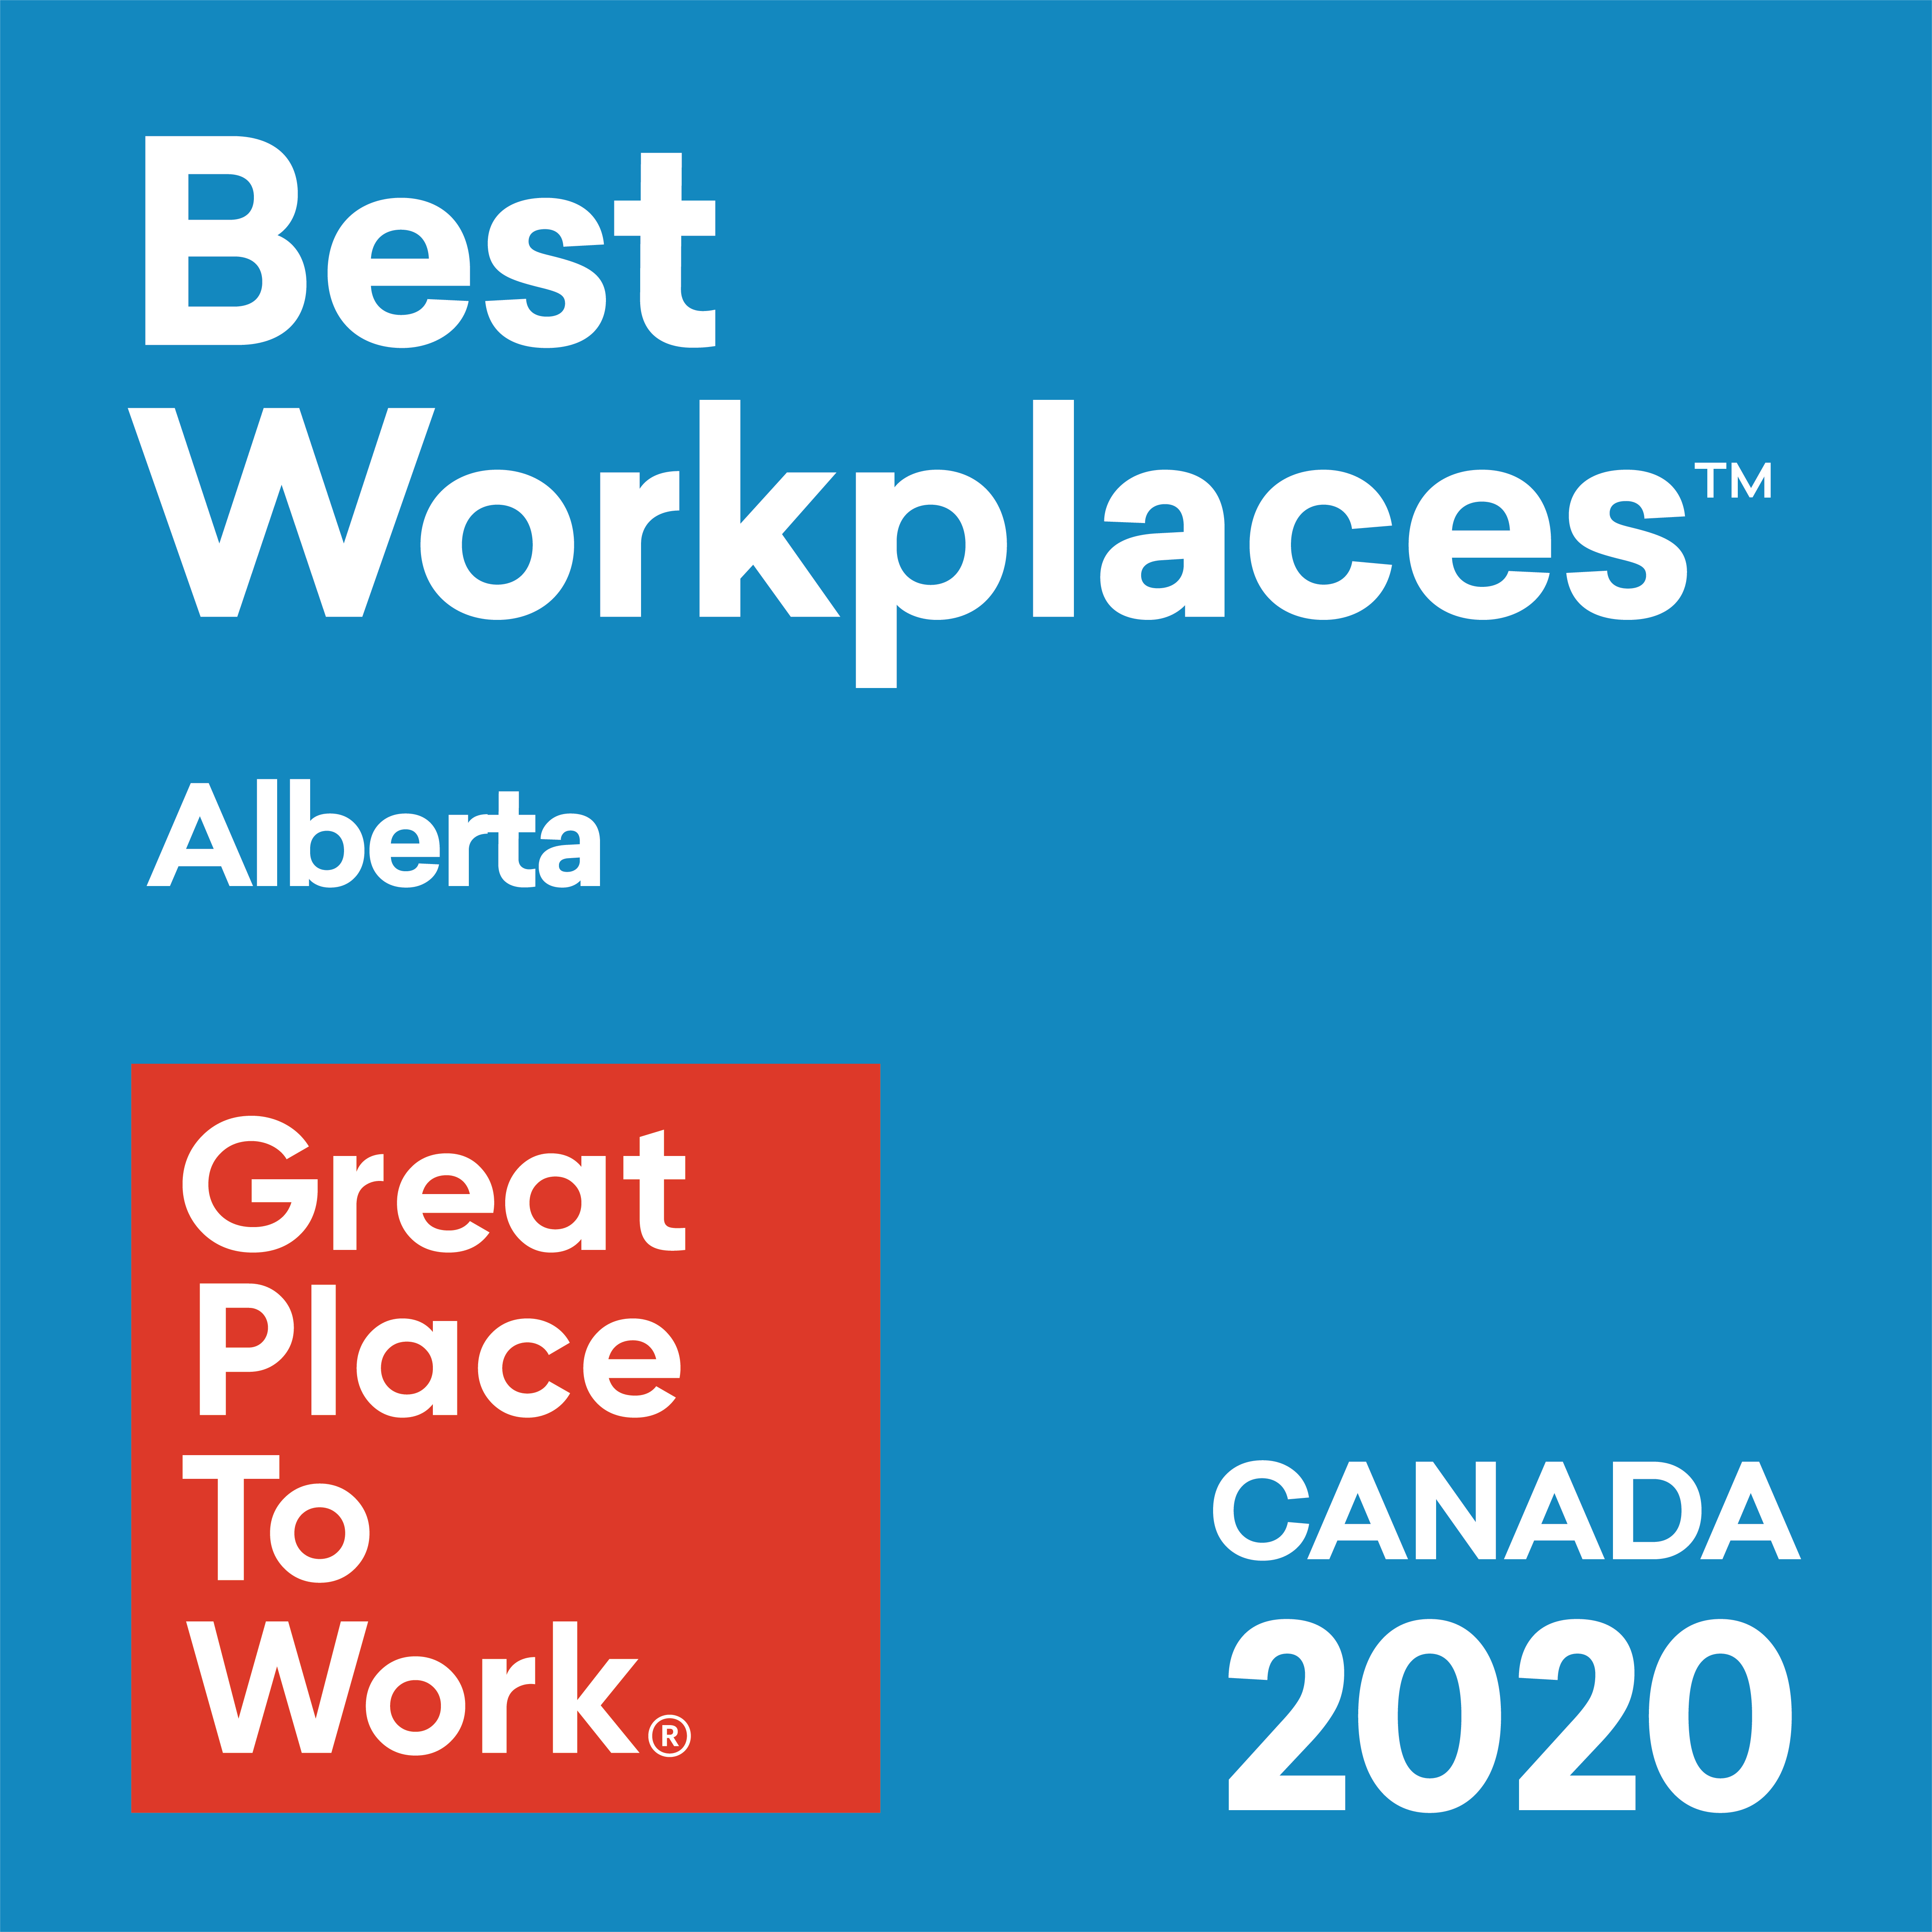 How to get on the list of Best Workplaces in Alberta | Great Place To